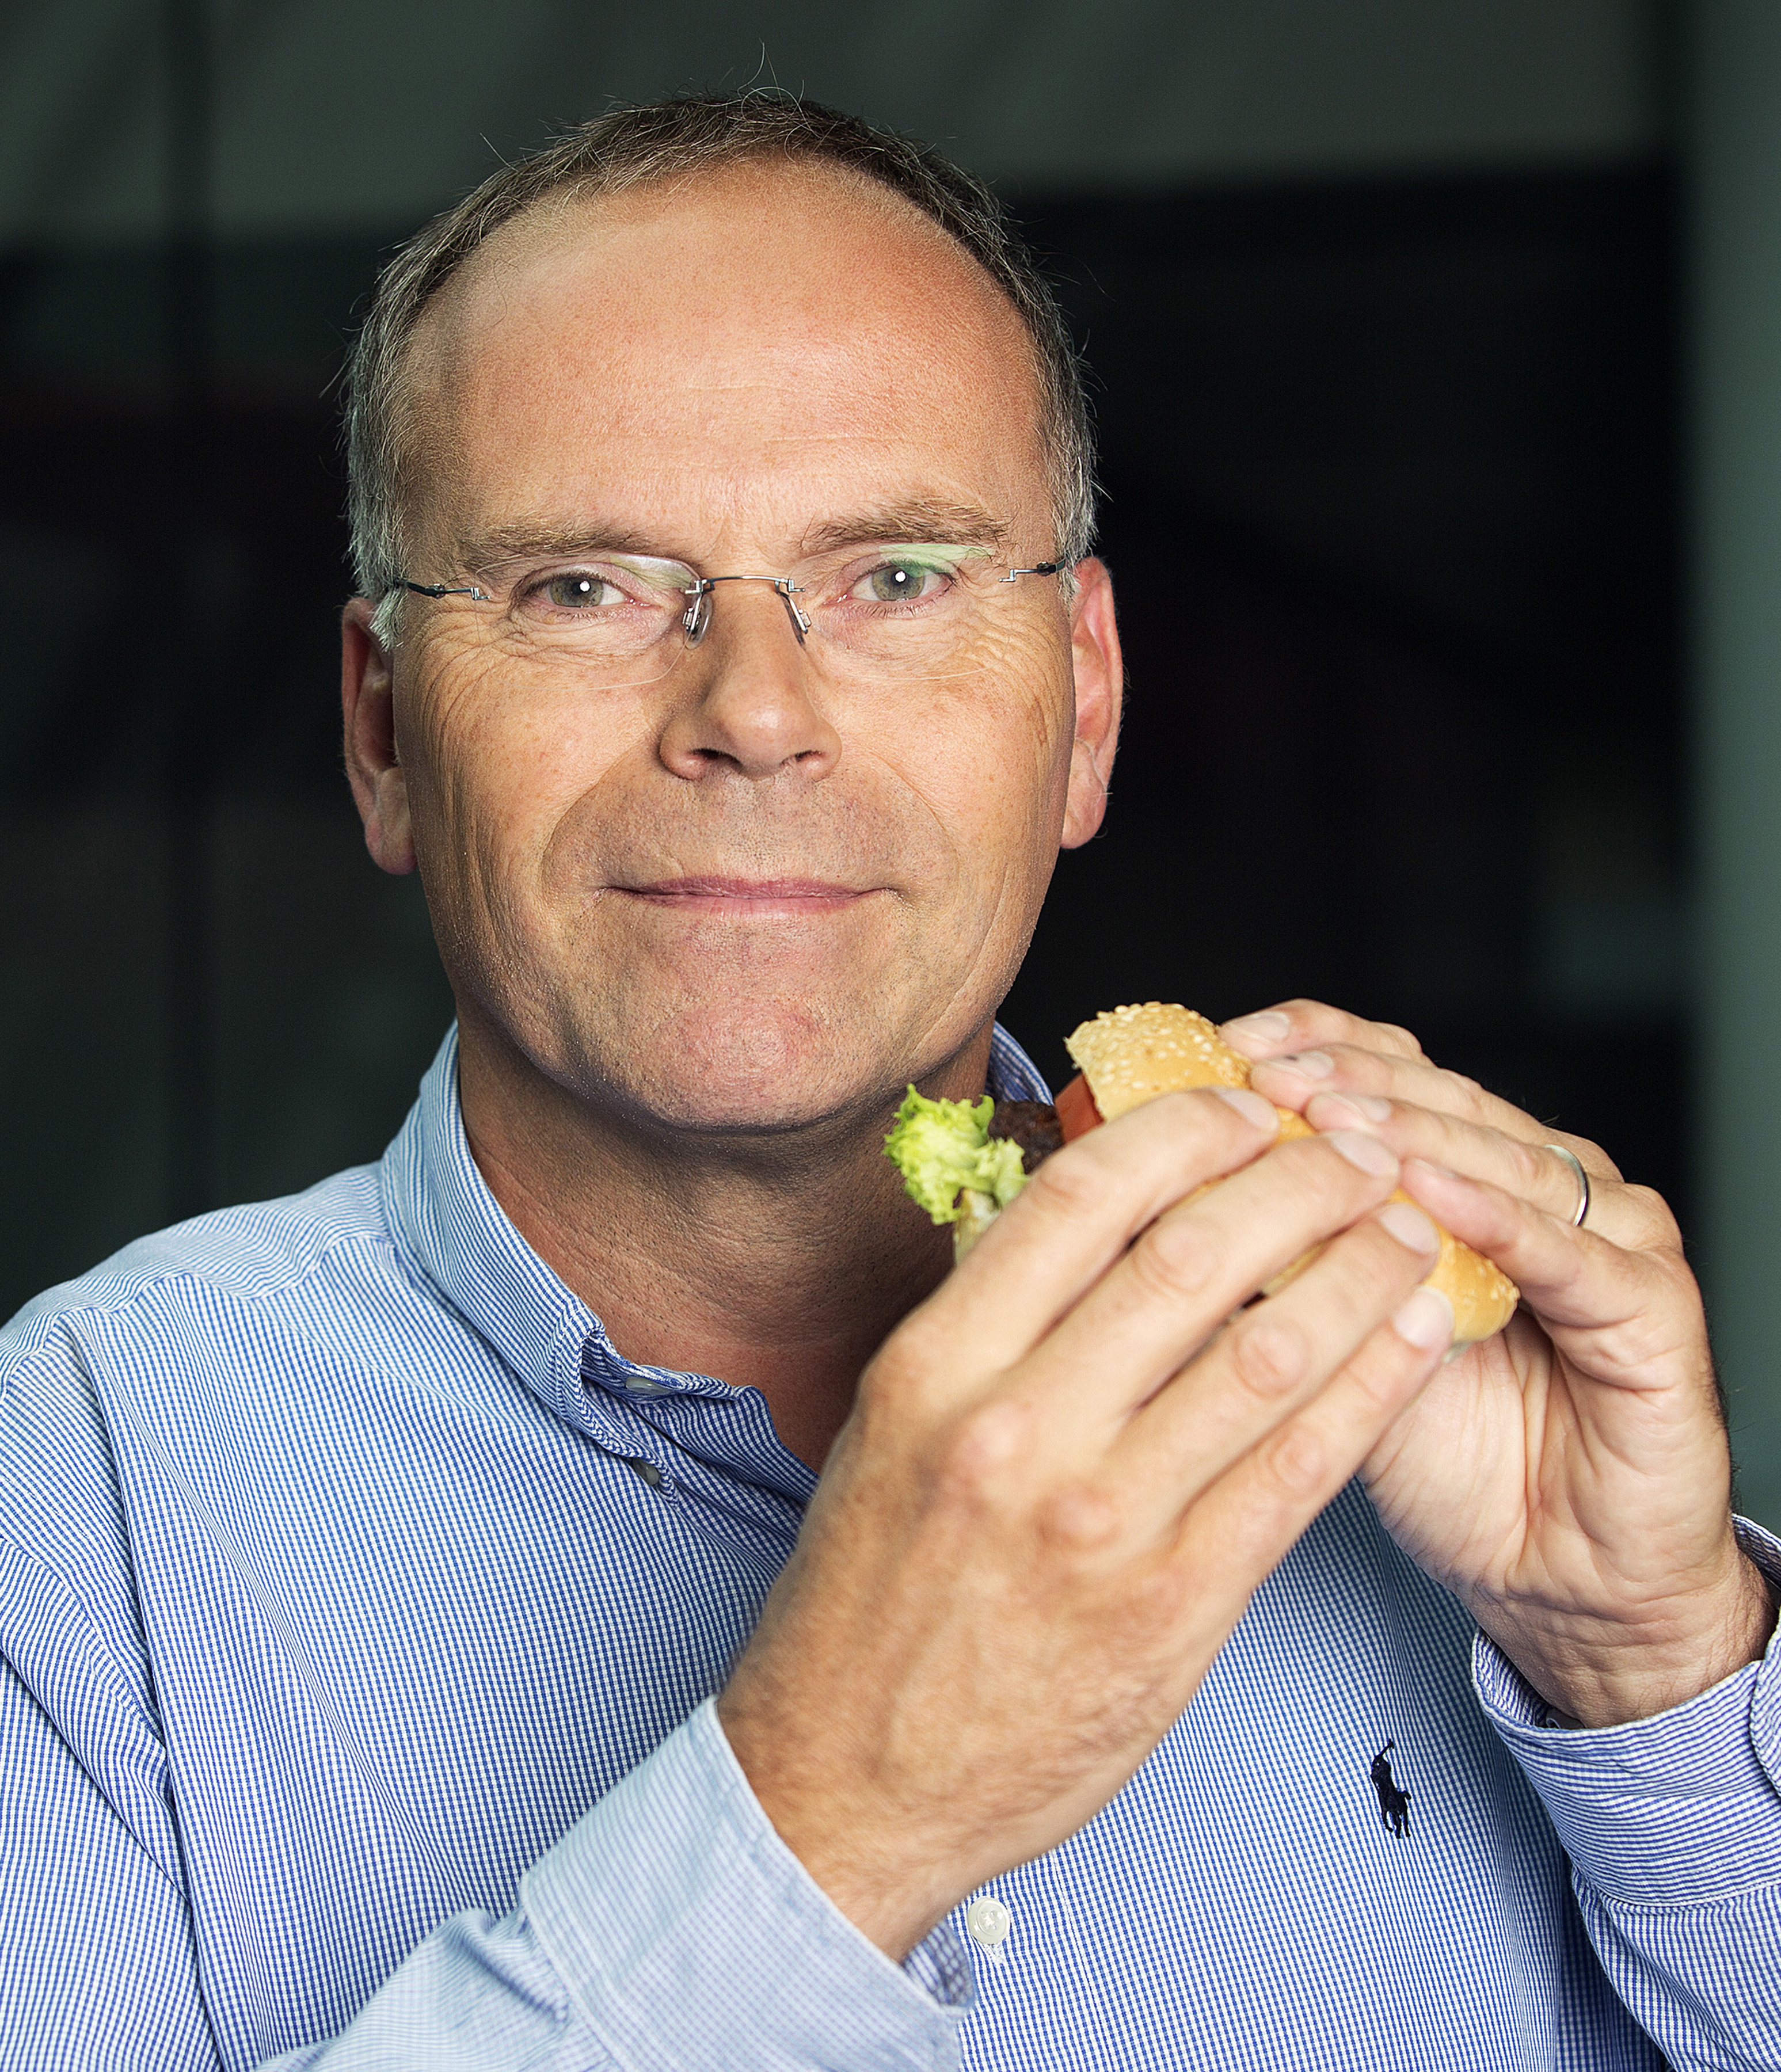 Mark Post, a Dutch scientist, poses for a photograph while holding the world's first beef burger created from stem cells harvested from a living cow following a Bloomberg Television interview in London, U.K., on Tuesday, Aug. 6, 2013. (Simon Dawson—Bloomberg /Getty Images)